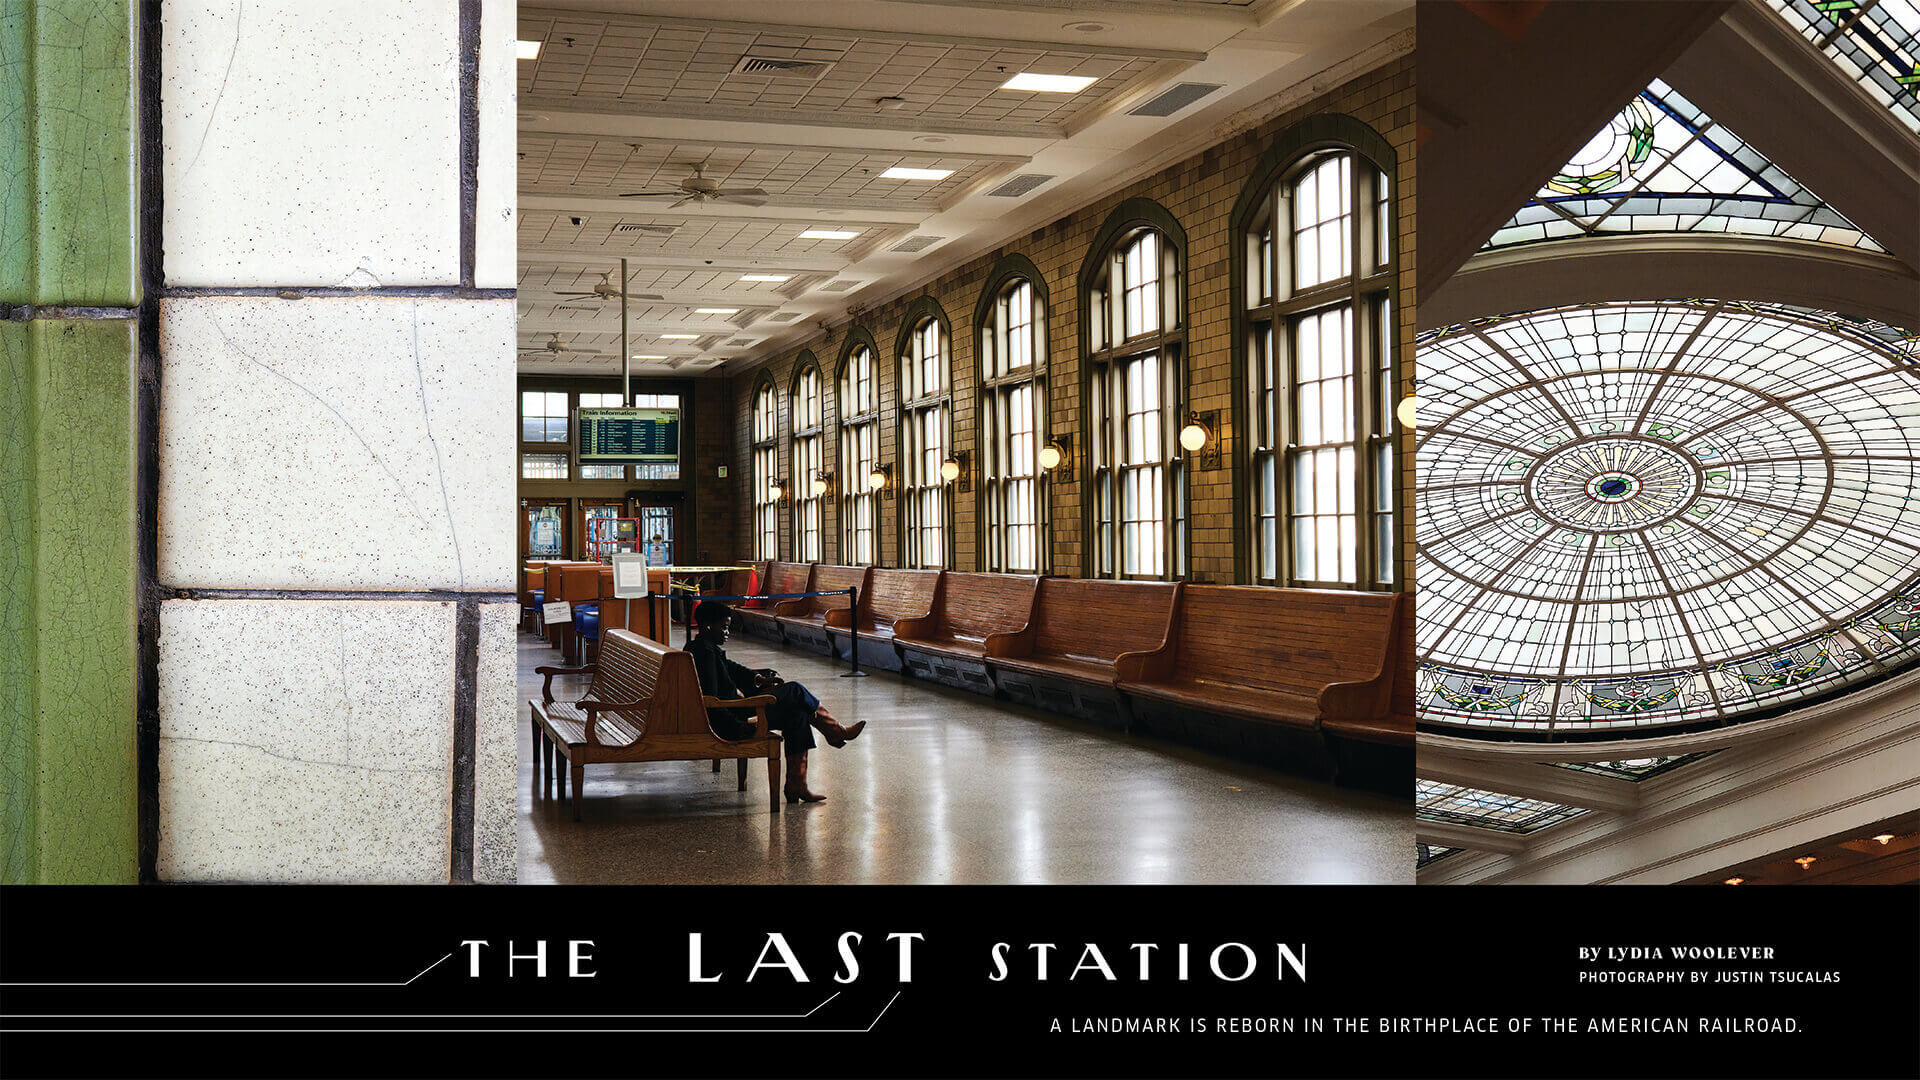 Penn Station is Once Again on the Verge of Rebirth. Will It Finally Succeed?